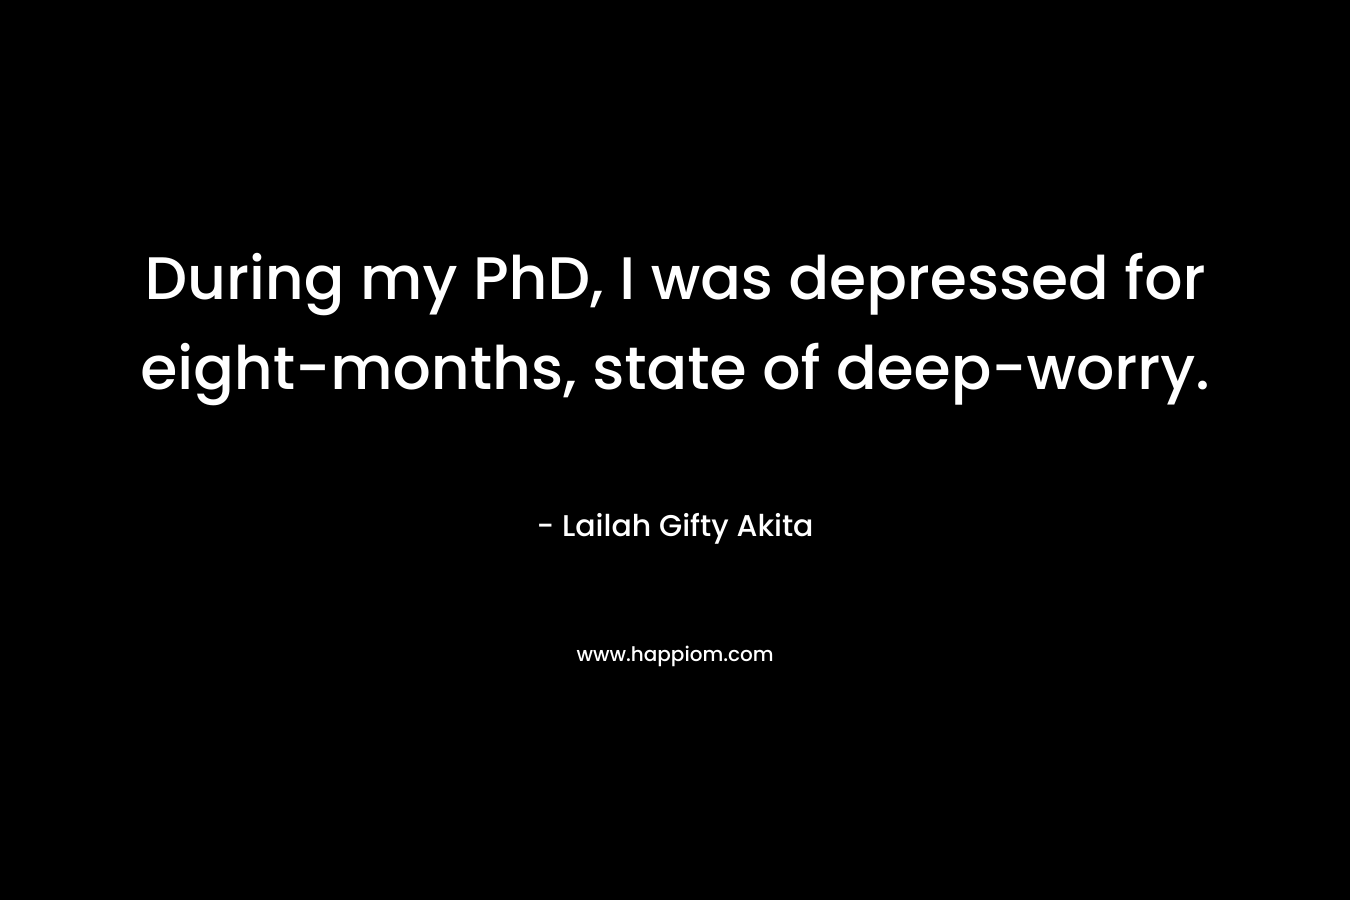 During my PhD, I was depressed for eight-months, state of deep-worry. – Lailah Gifty Akita